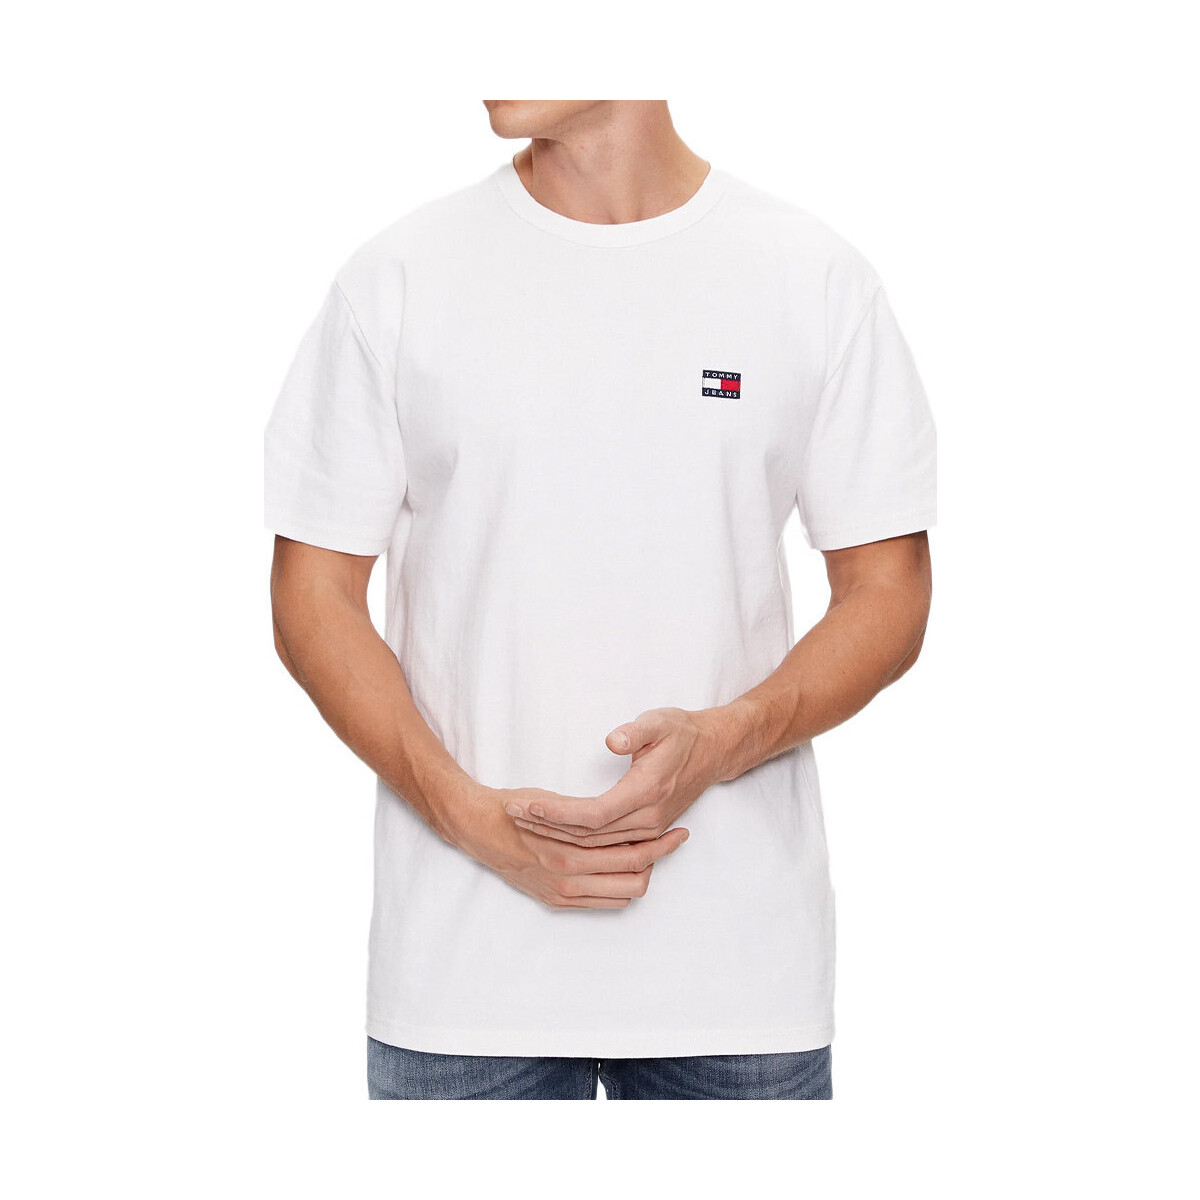 Textiel Heren T-shirts & Polo’s Tommy Hilfiger  Wit